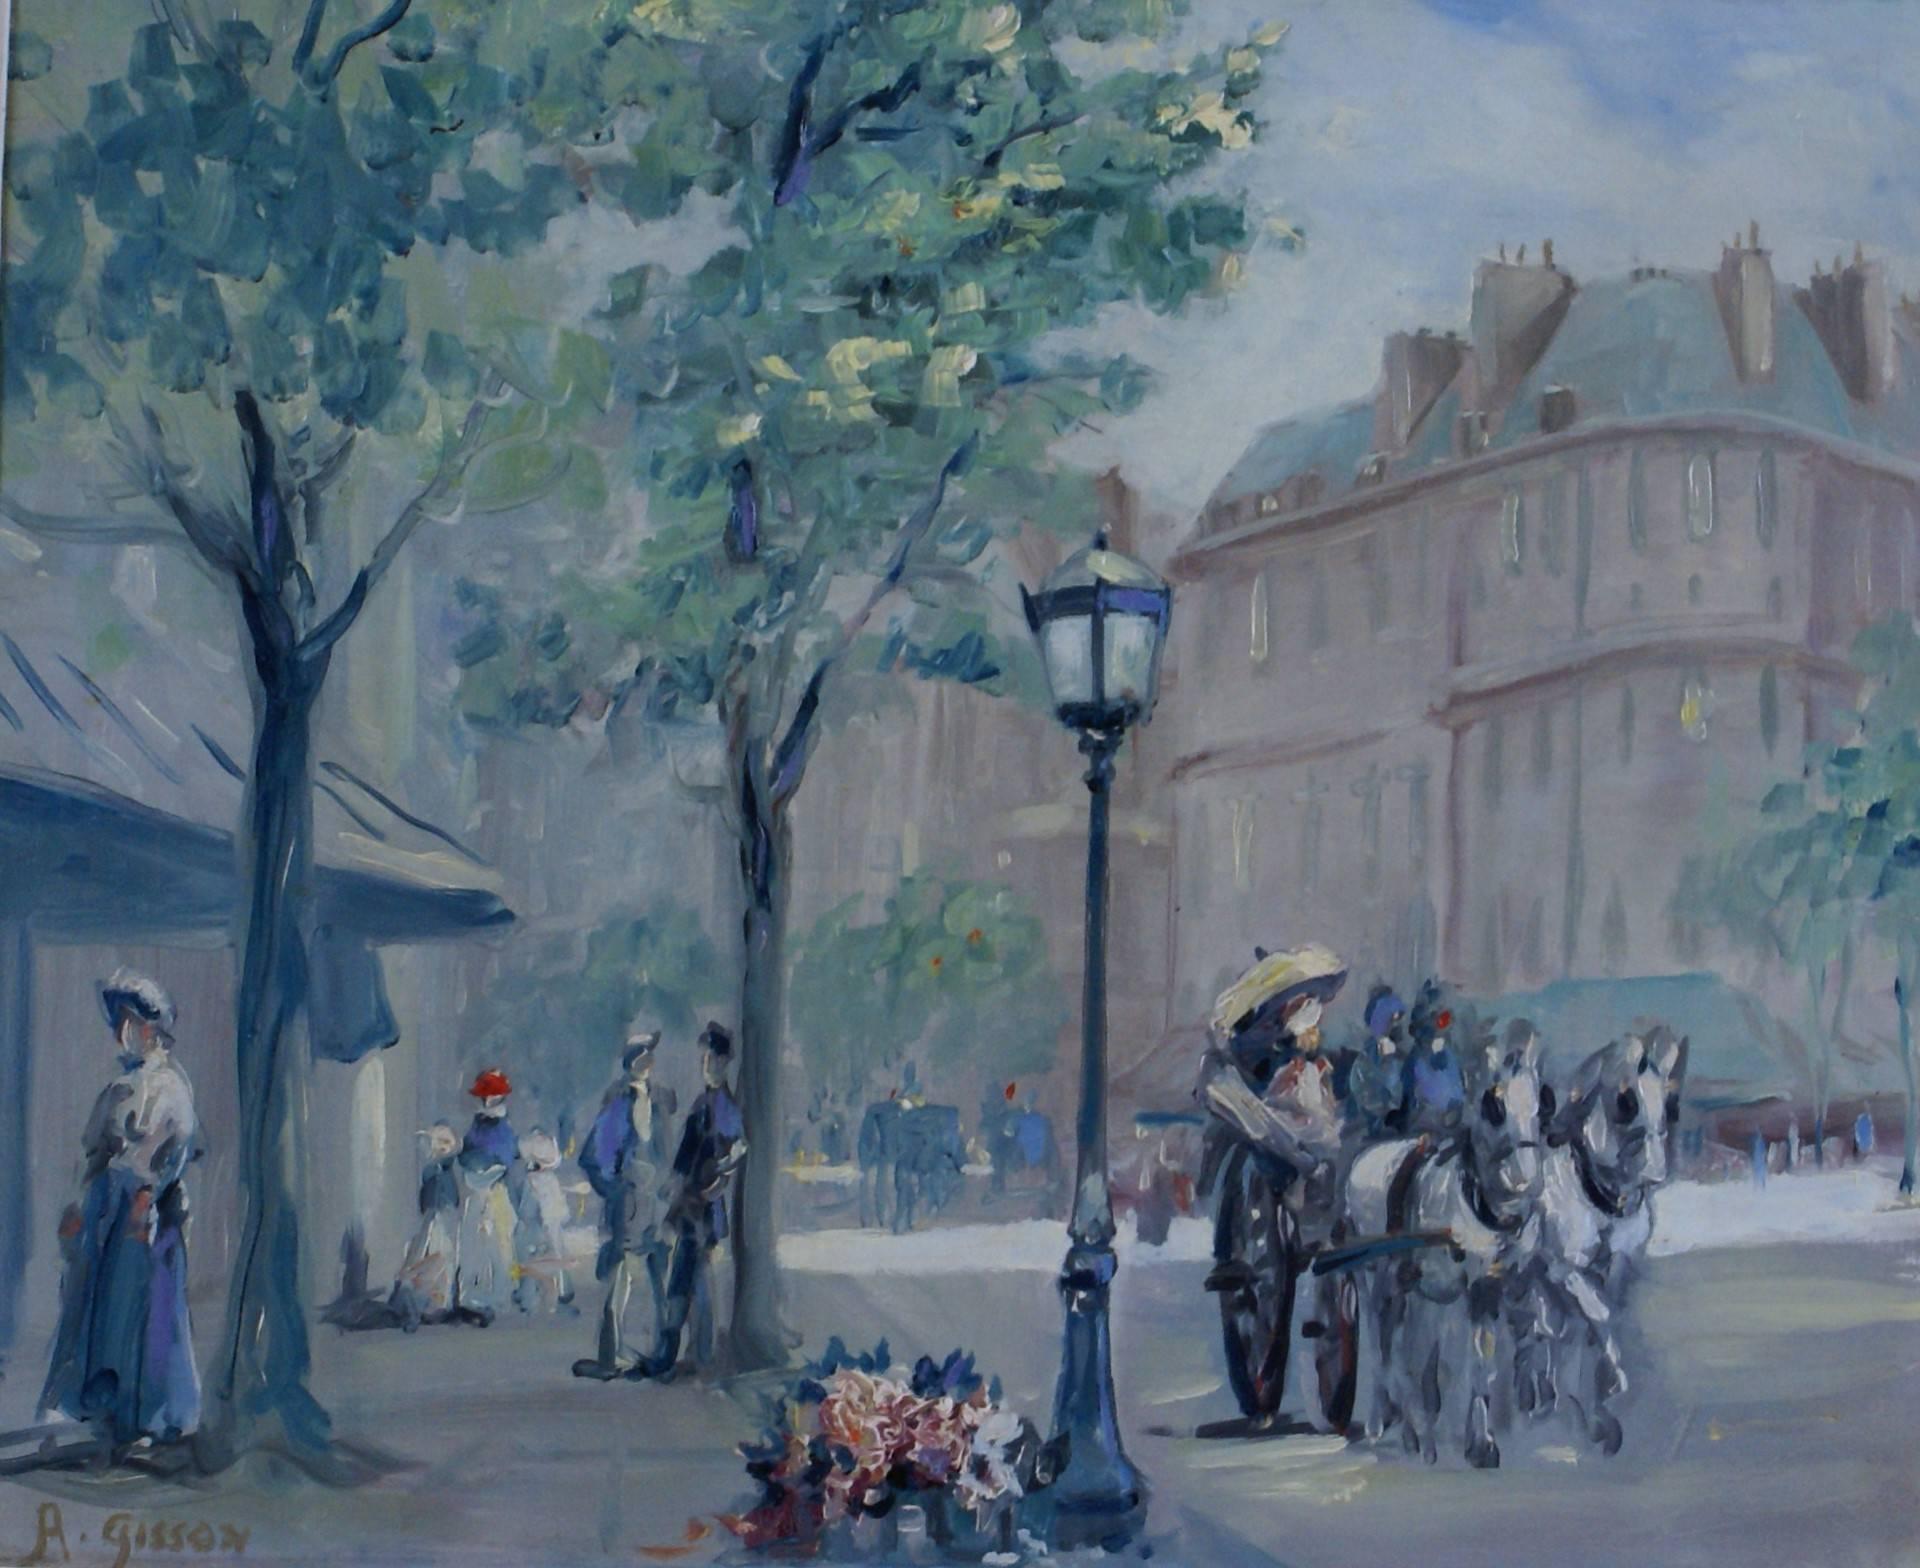 Parisian Boulevard - Painting by André Gisson